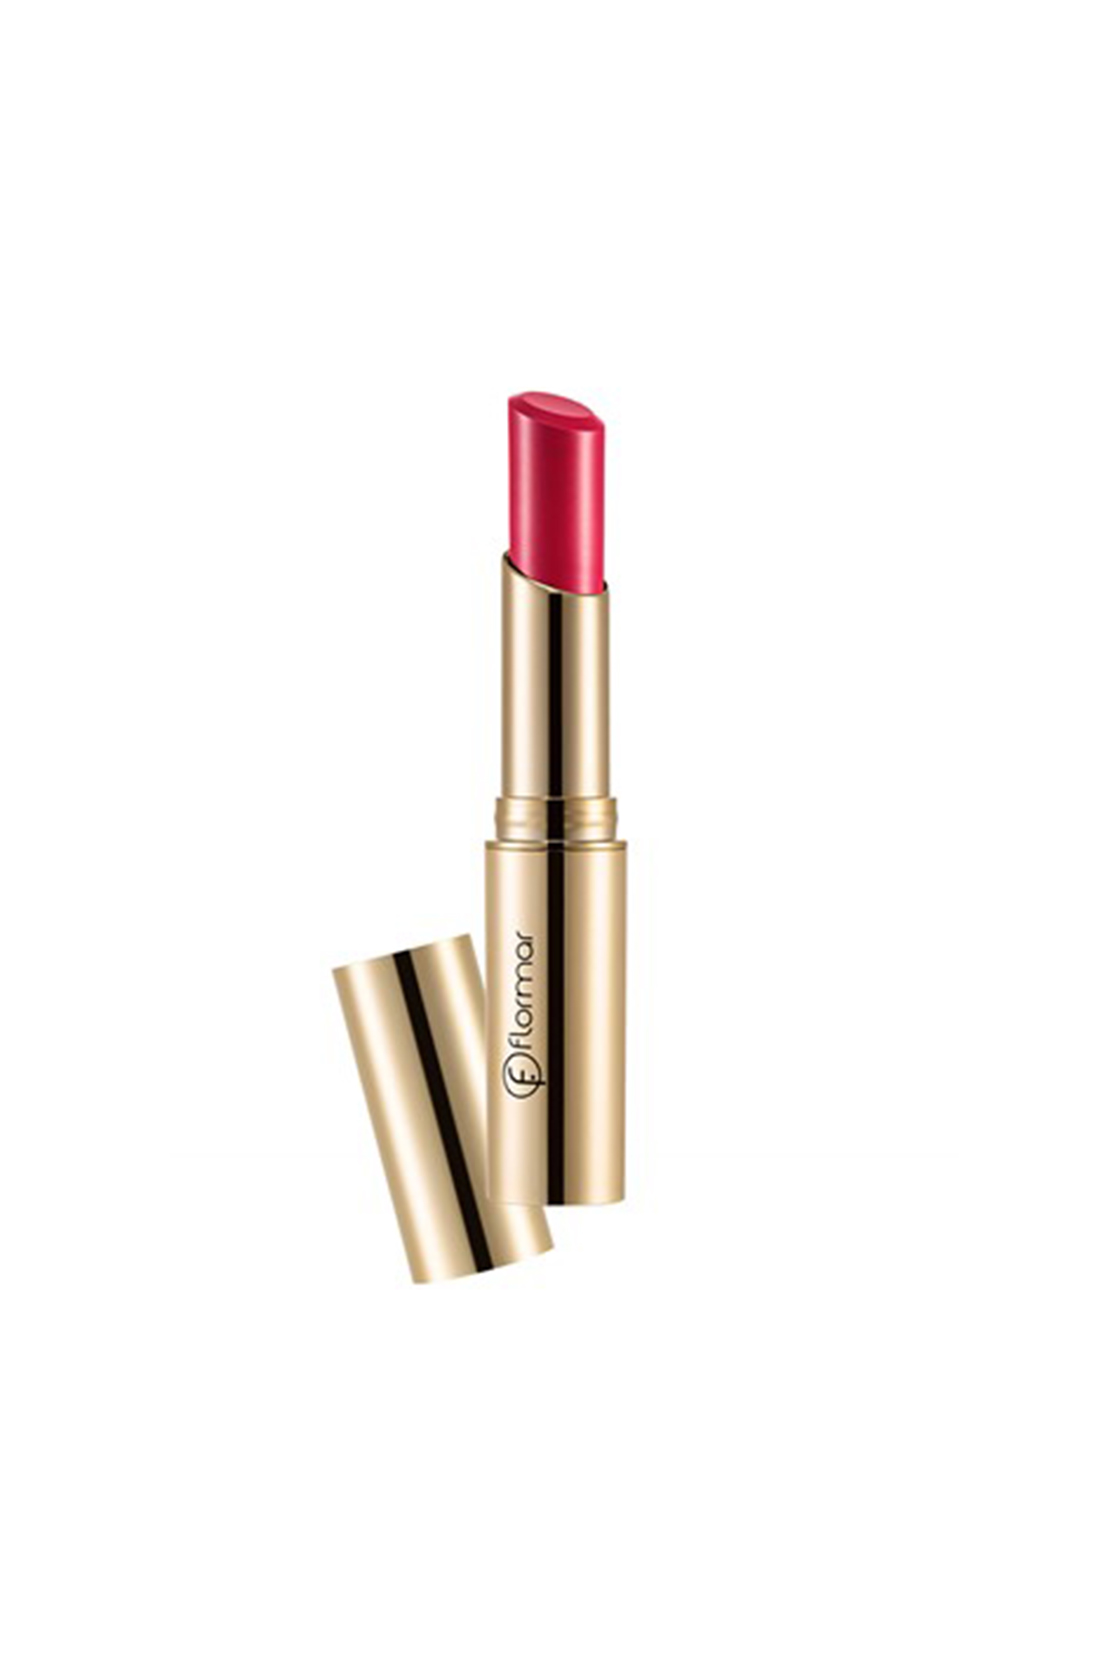 FLORMAR - Deluxe Cashmere Stylo Lipstick